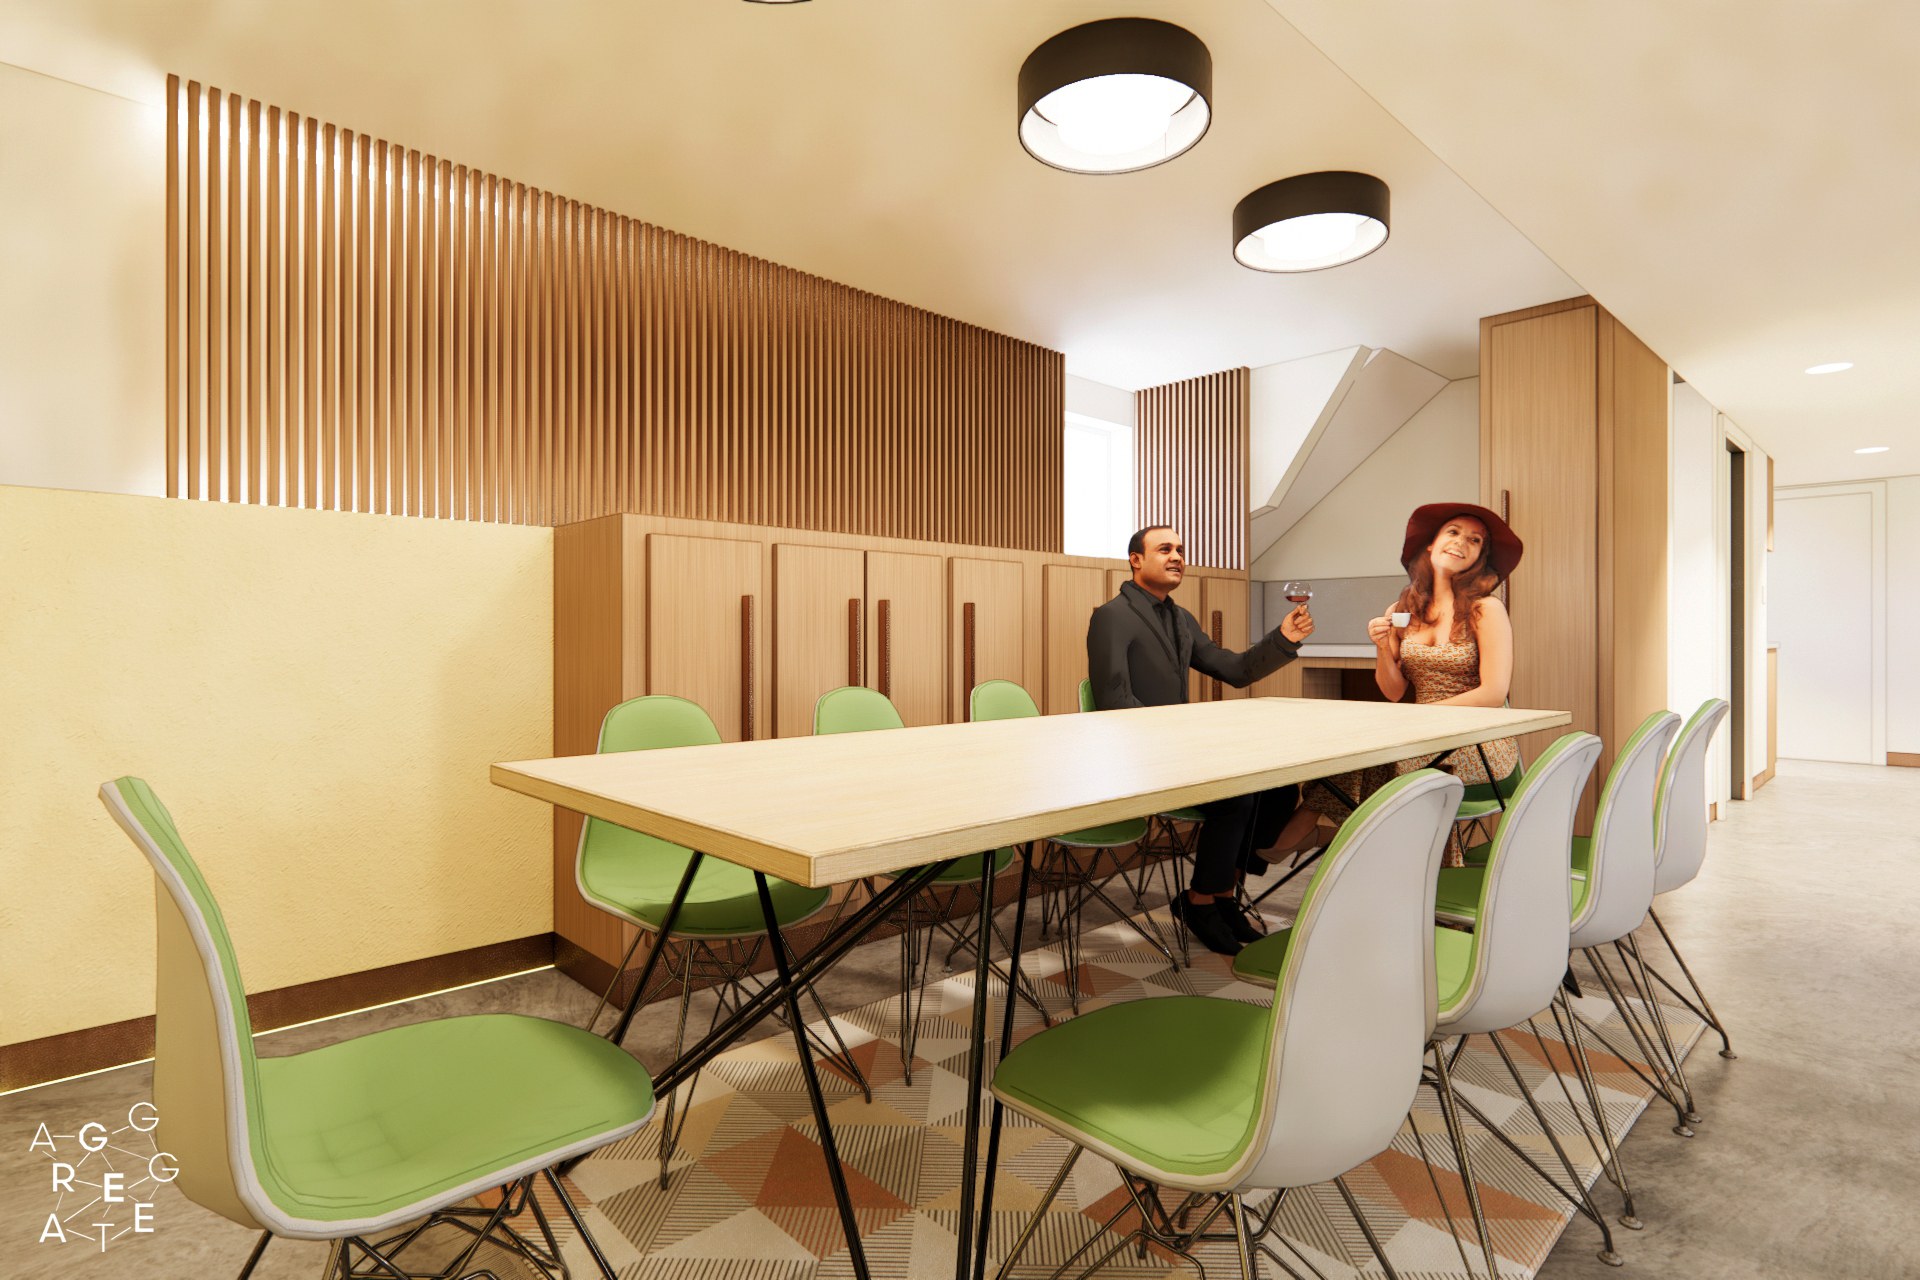 Digital perspective drawing of interior dining room space with two people sitting at a 10-seat table.